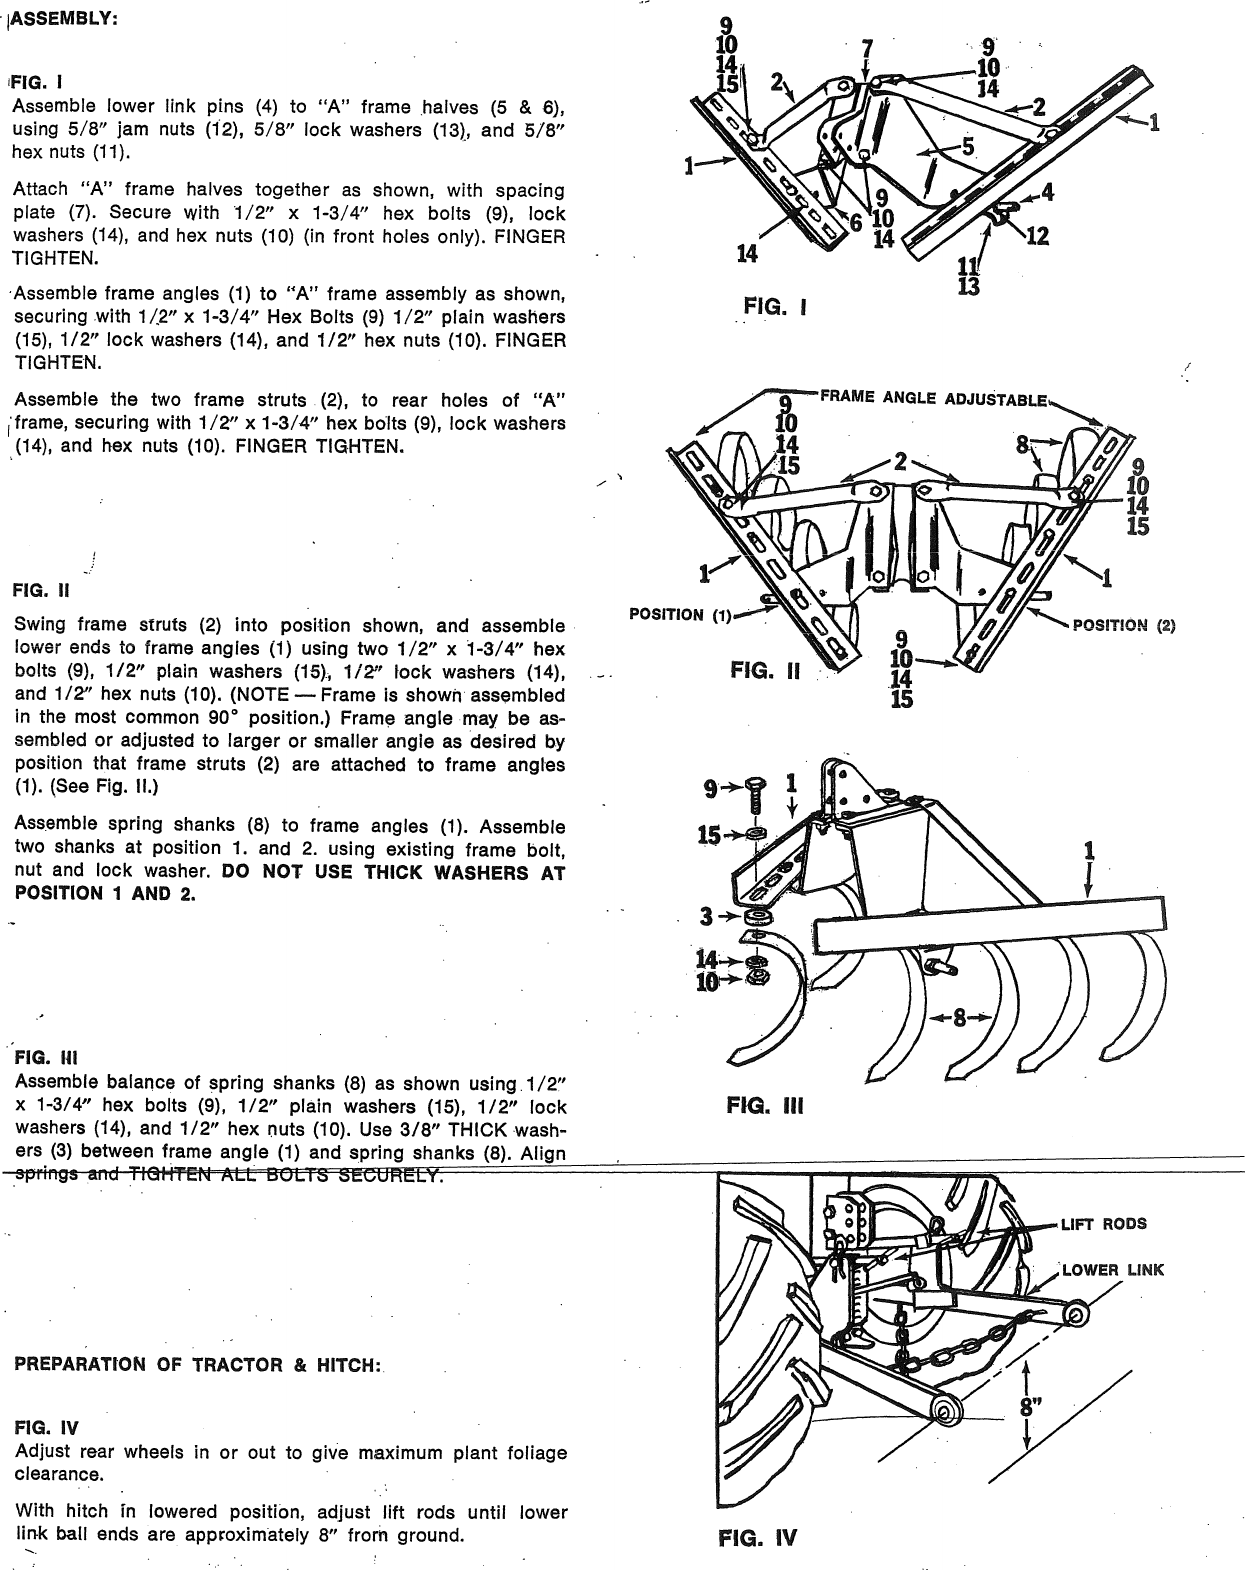 Page 2 of 4 - Brinly 3pt One Row Spring Shank Cultivator (CC-1000) Cultivator(CC-1000)